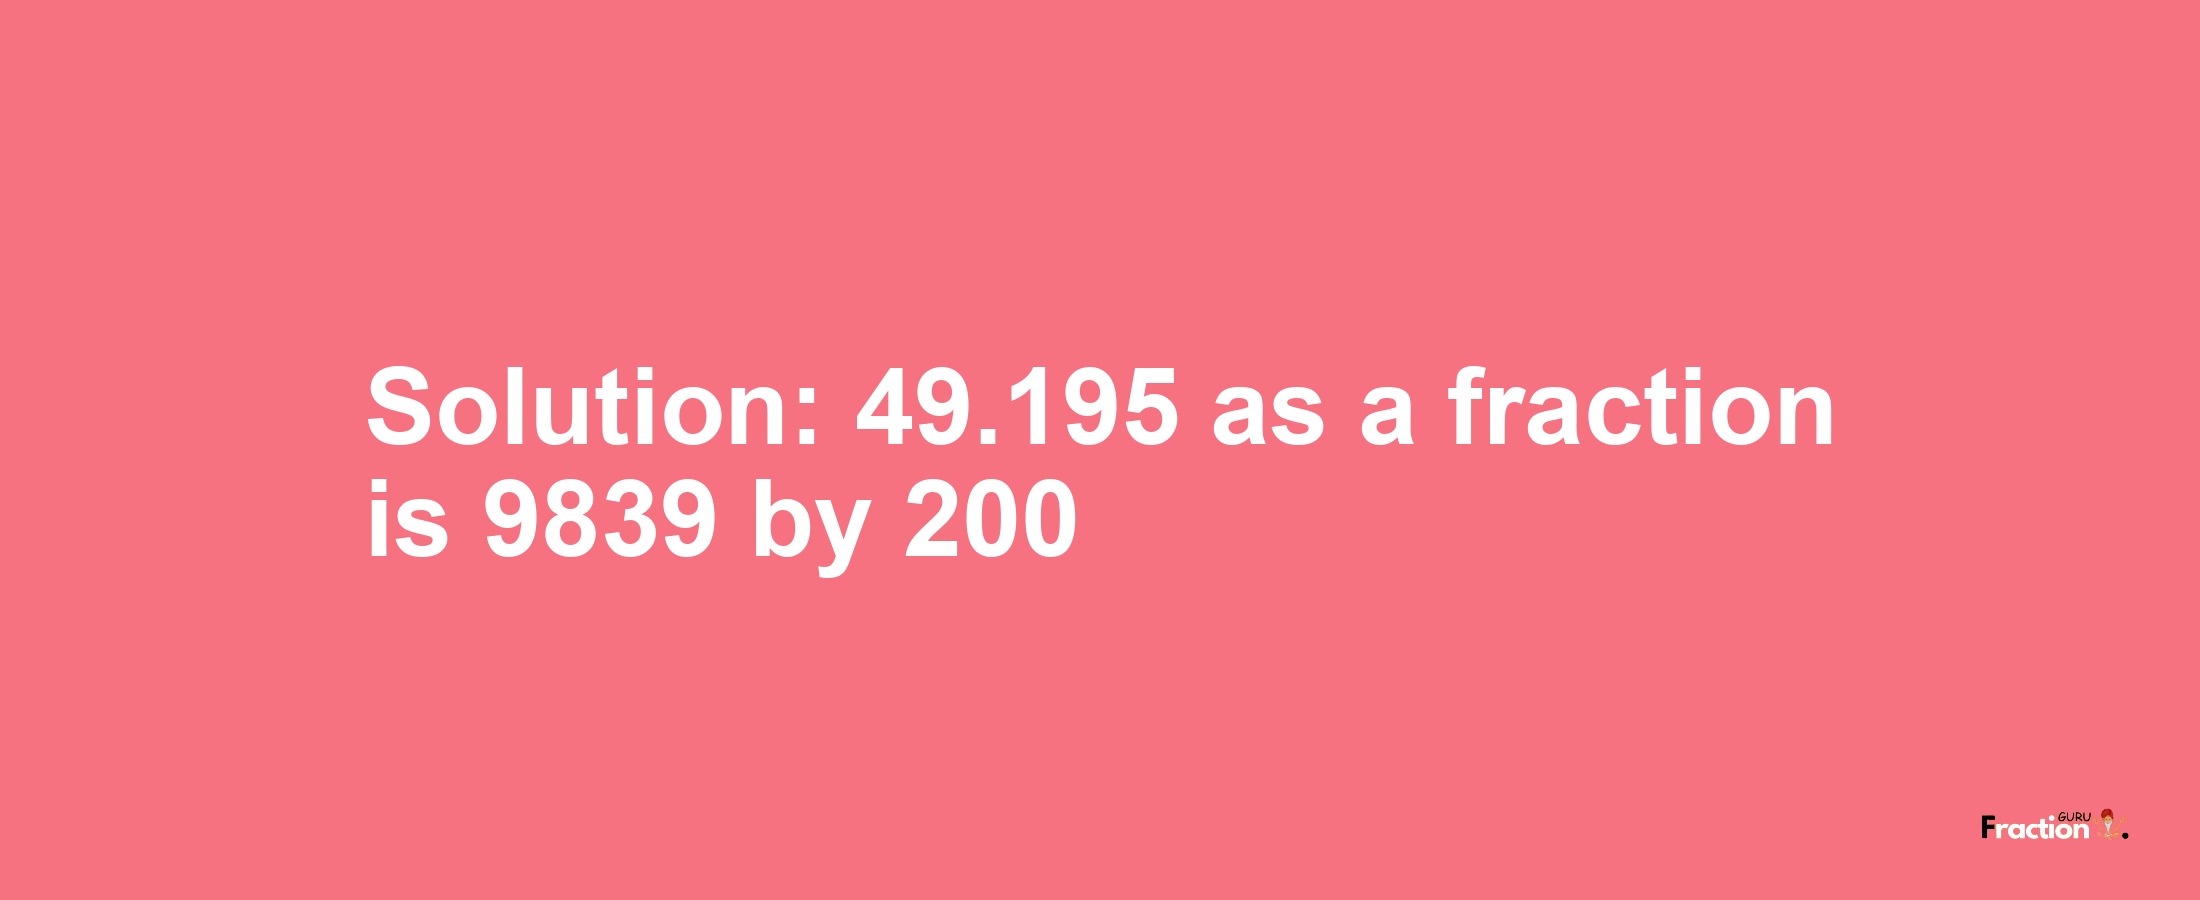 Solution:49.195 as a fraction is 9839/200